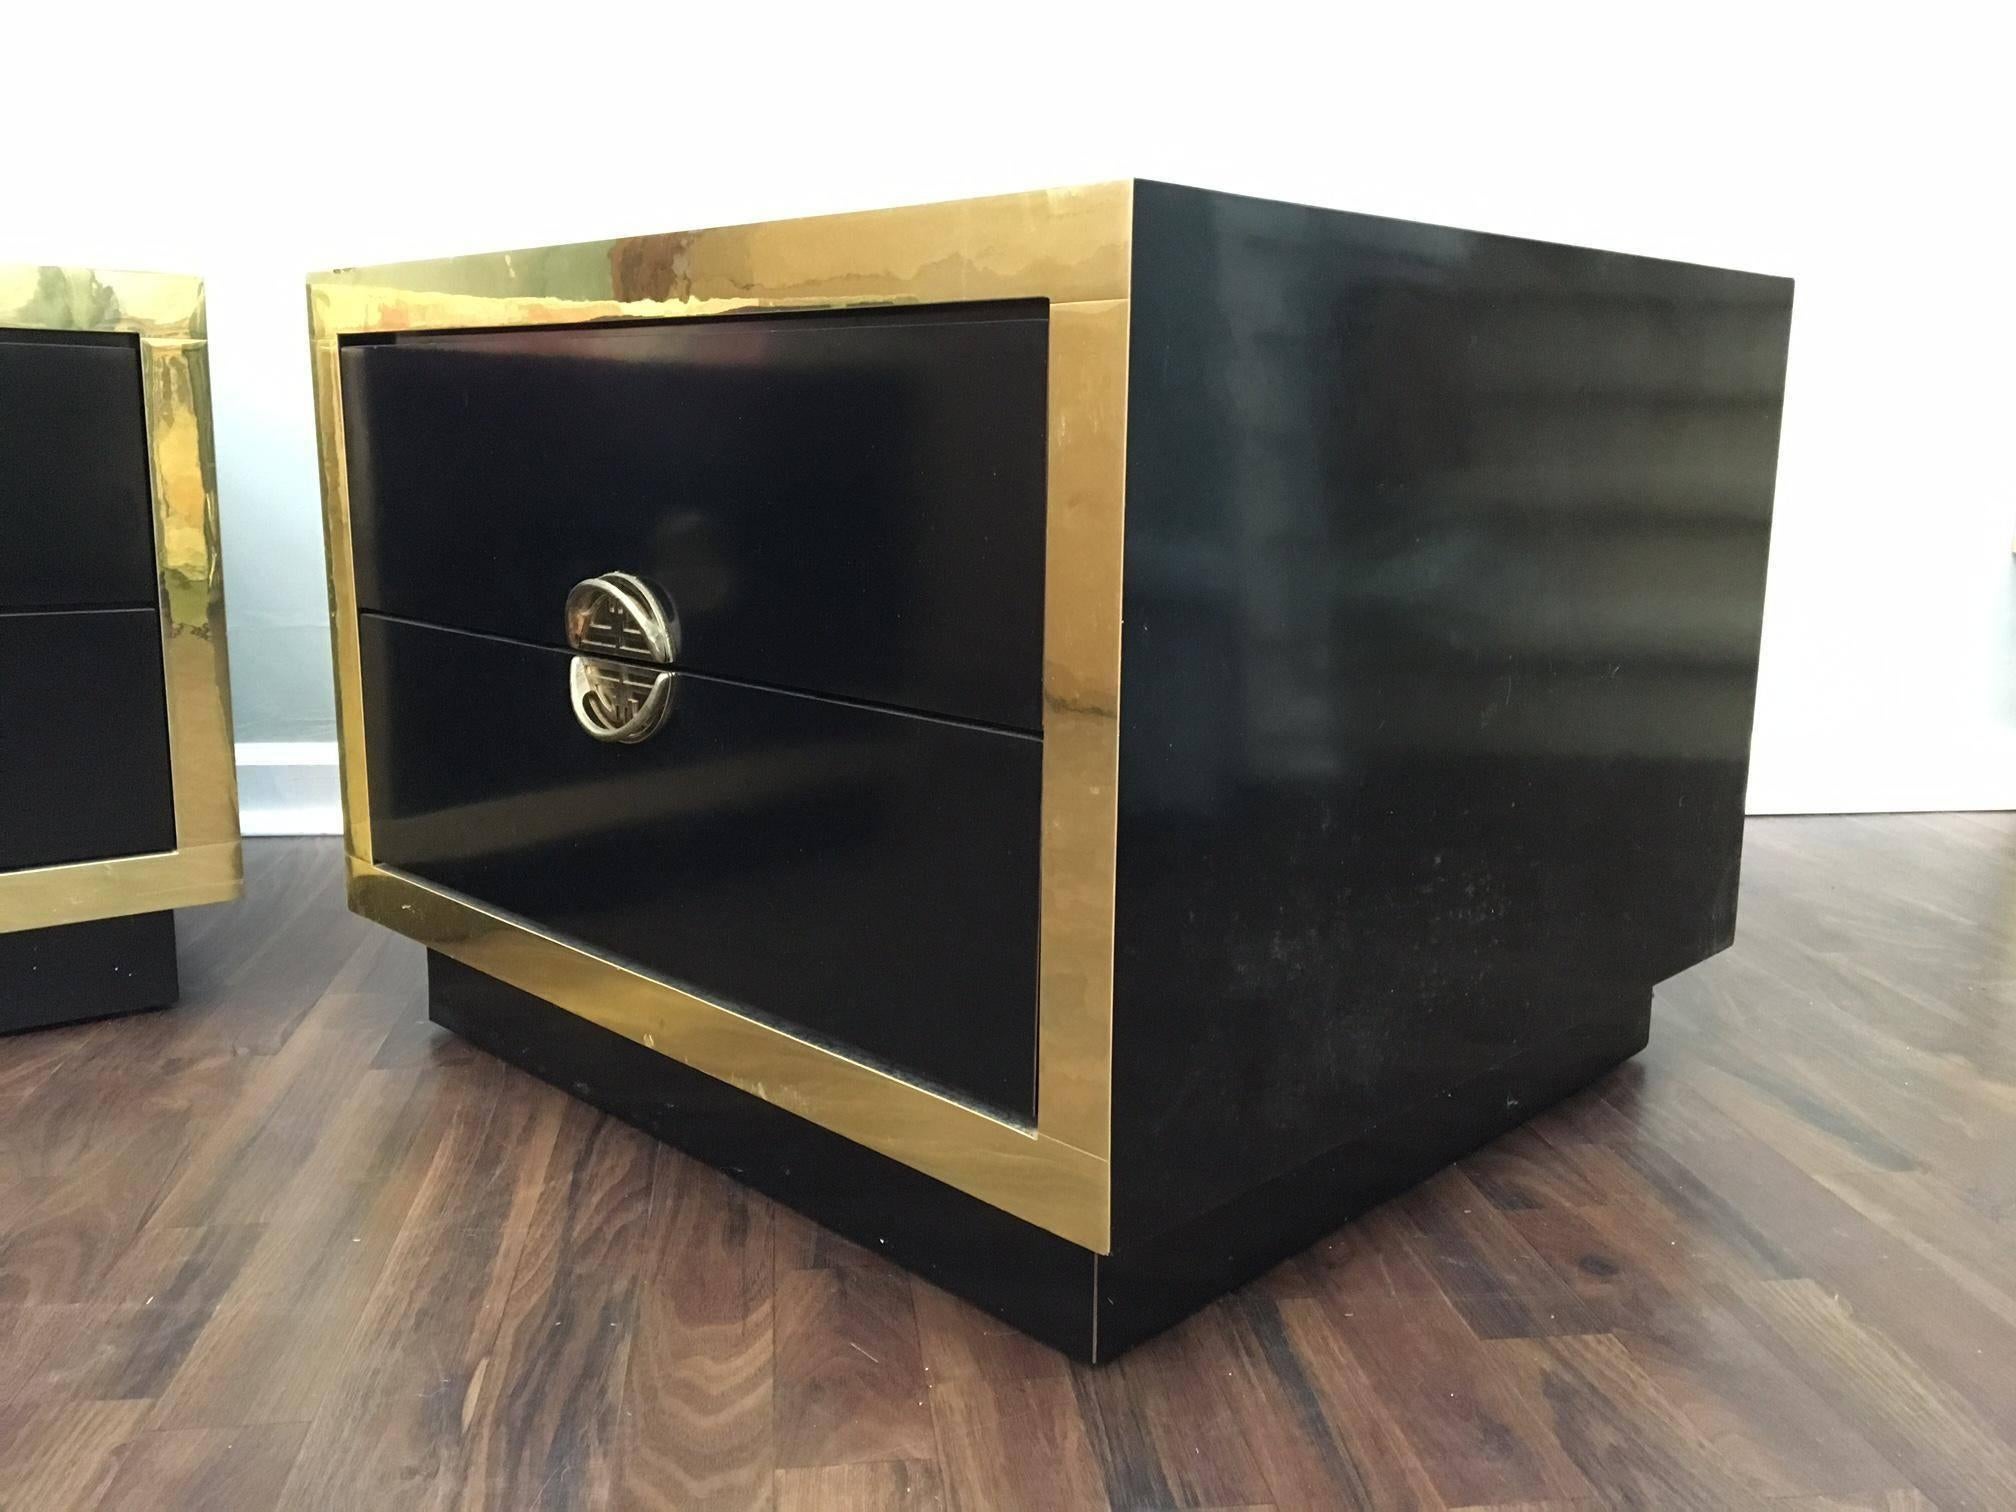 Black and gold Hollywood Regency nightstands feature Asian chinoiserie brass hardware and mirror finish. Each has two drawers and are in excellent vintage condition other than chip on lower rear side and small dent on top rear corner (see photos).